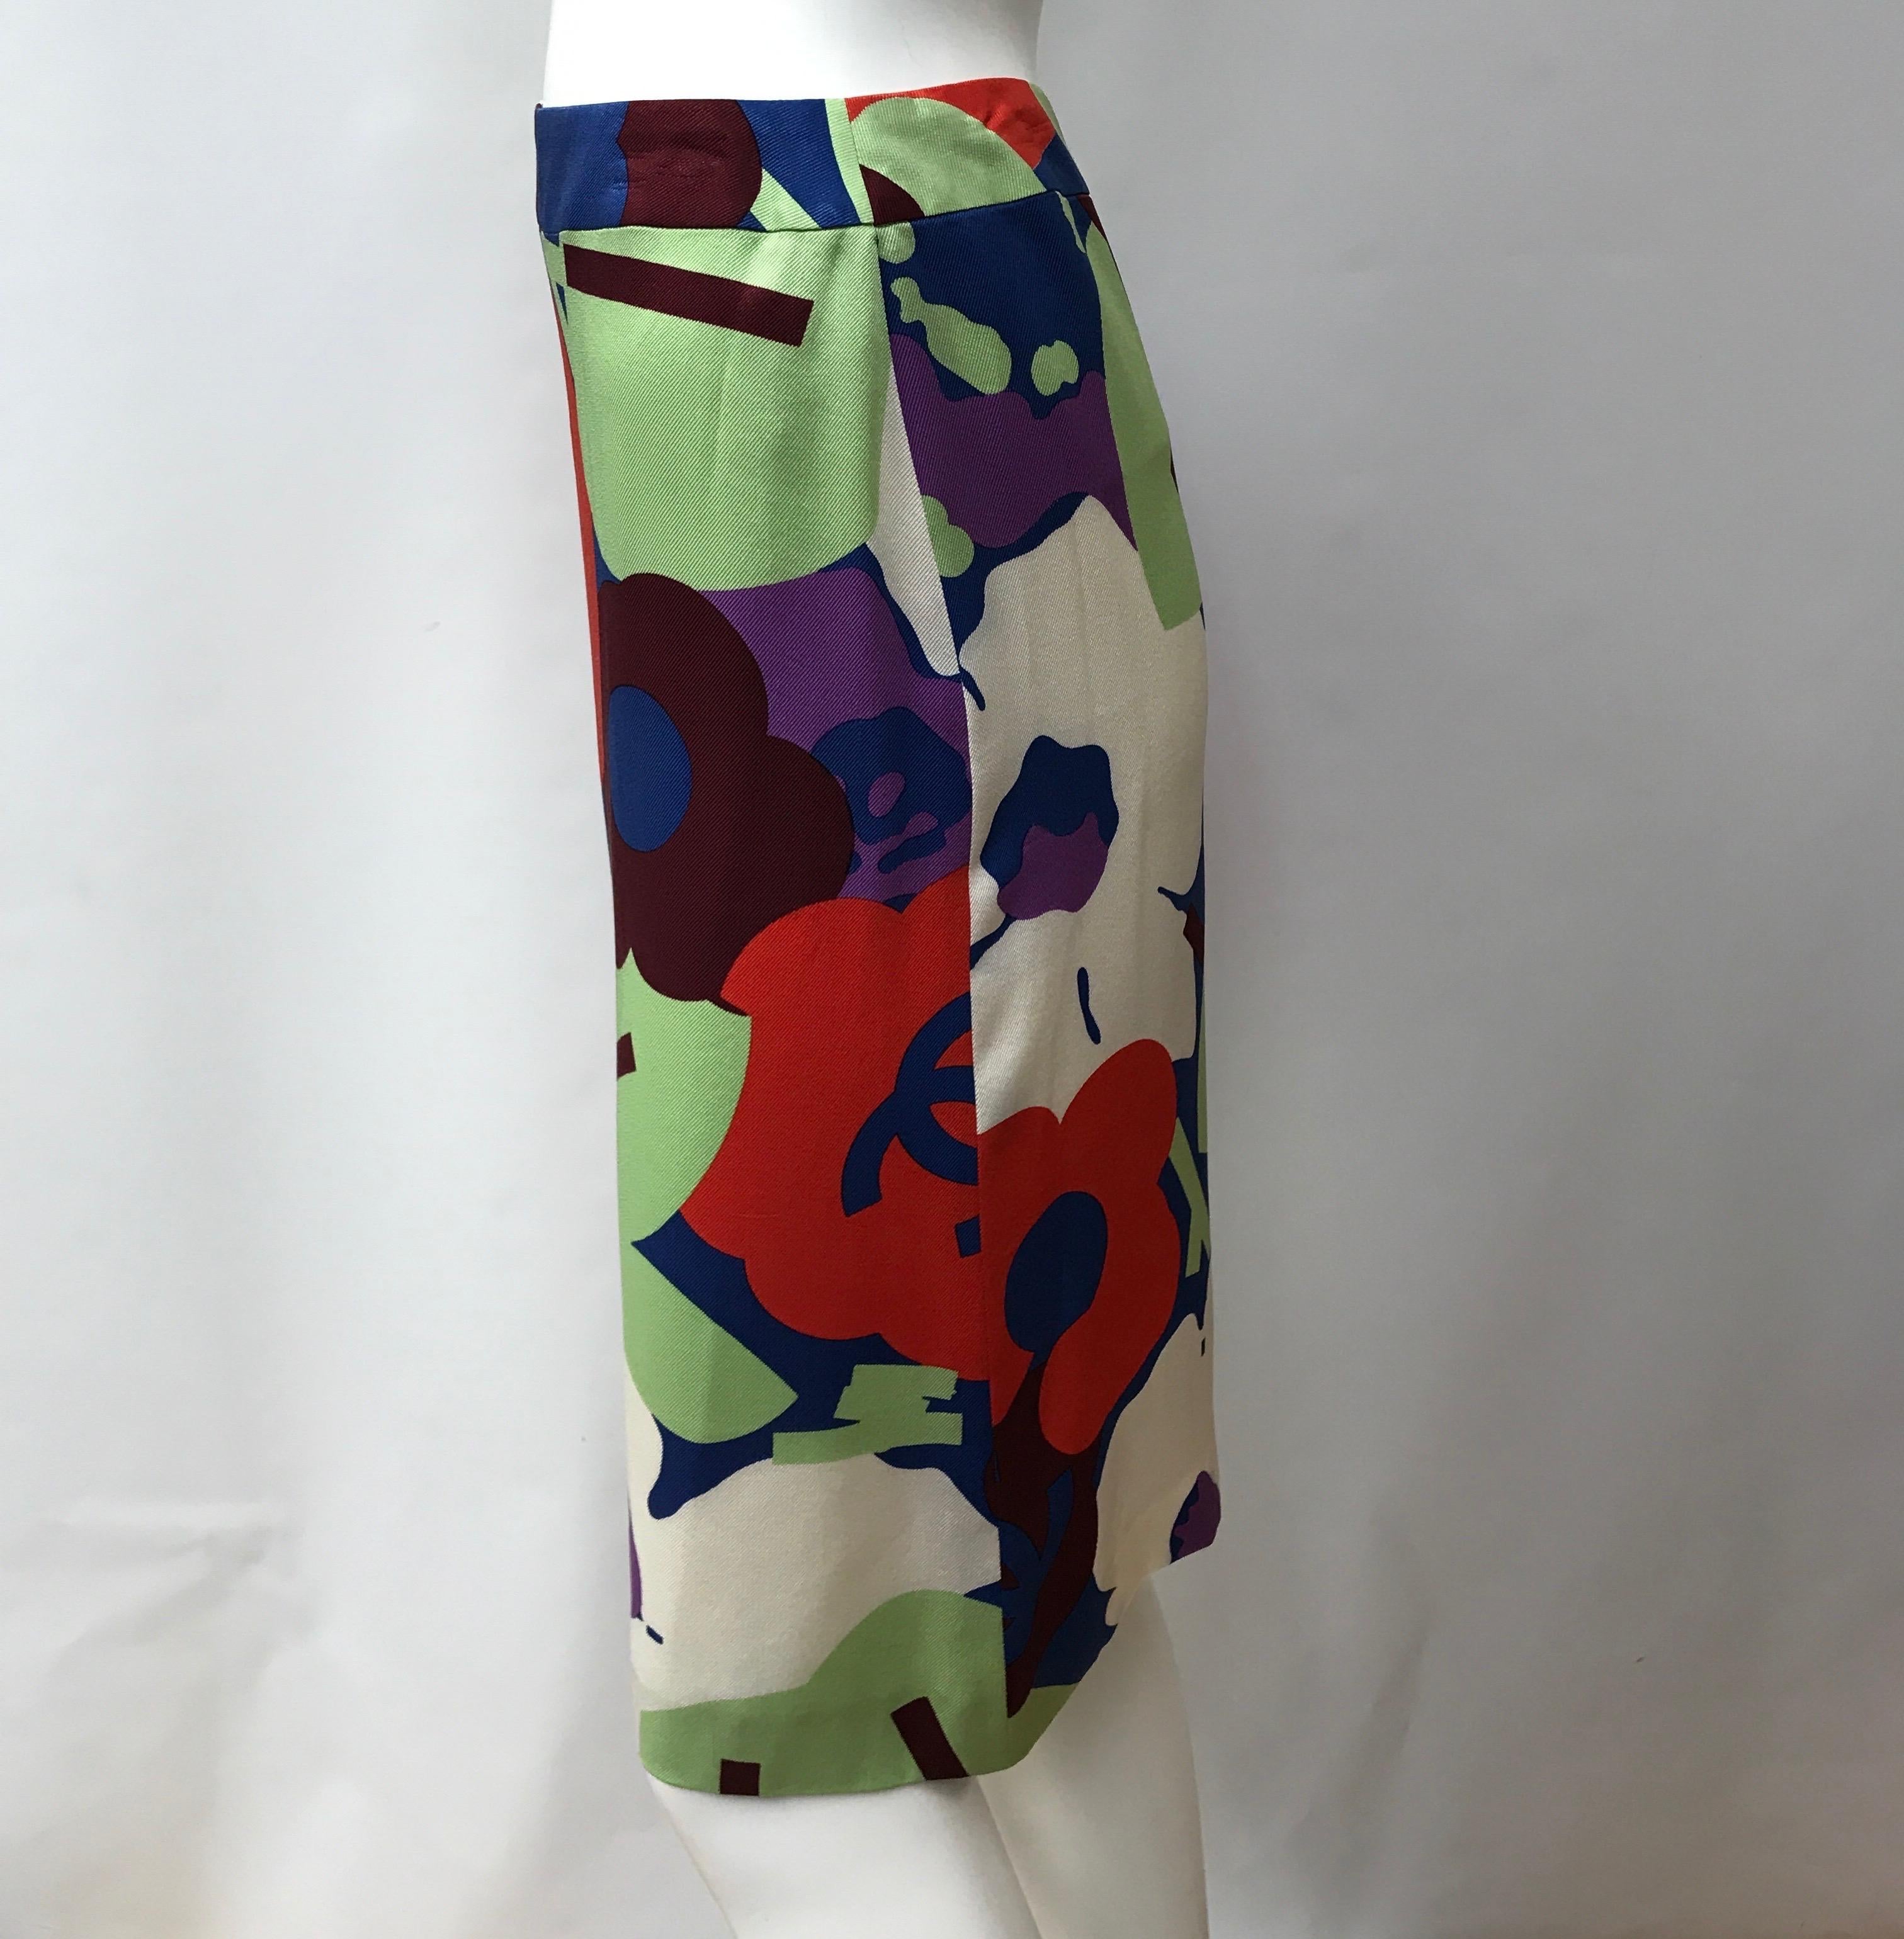 Chanel Multi colored Silk Skirt-38 from the runway of the 2000 Spring/Summer collection. This adorable Chanel skirt is in excellent condition, it has minimal sign of use. It is made entirely of silk and has a floral pattern with multi colors. There